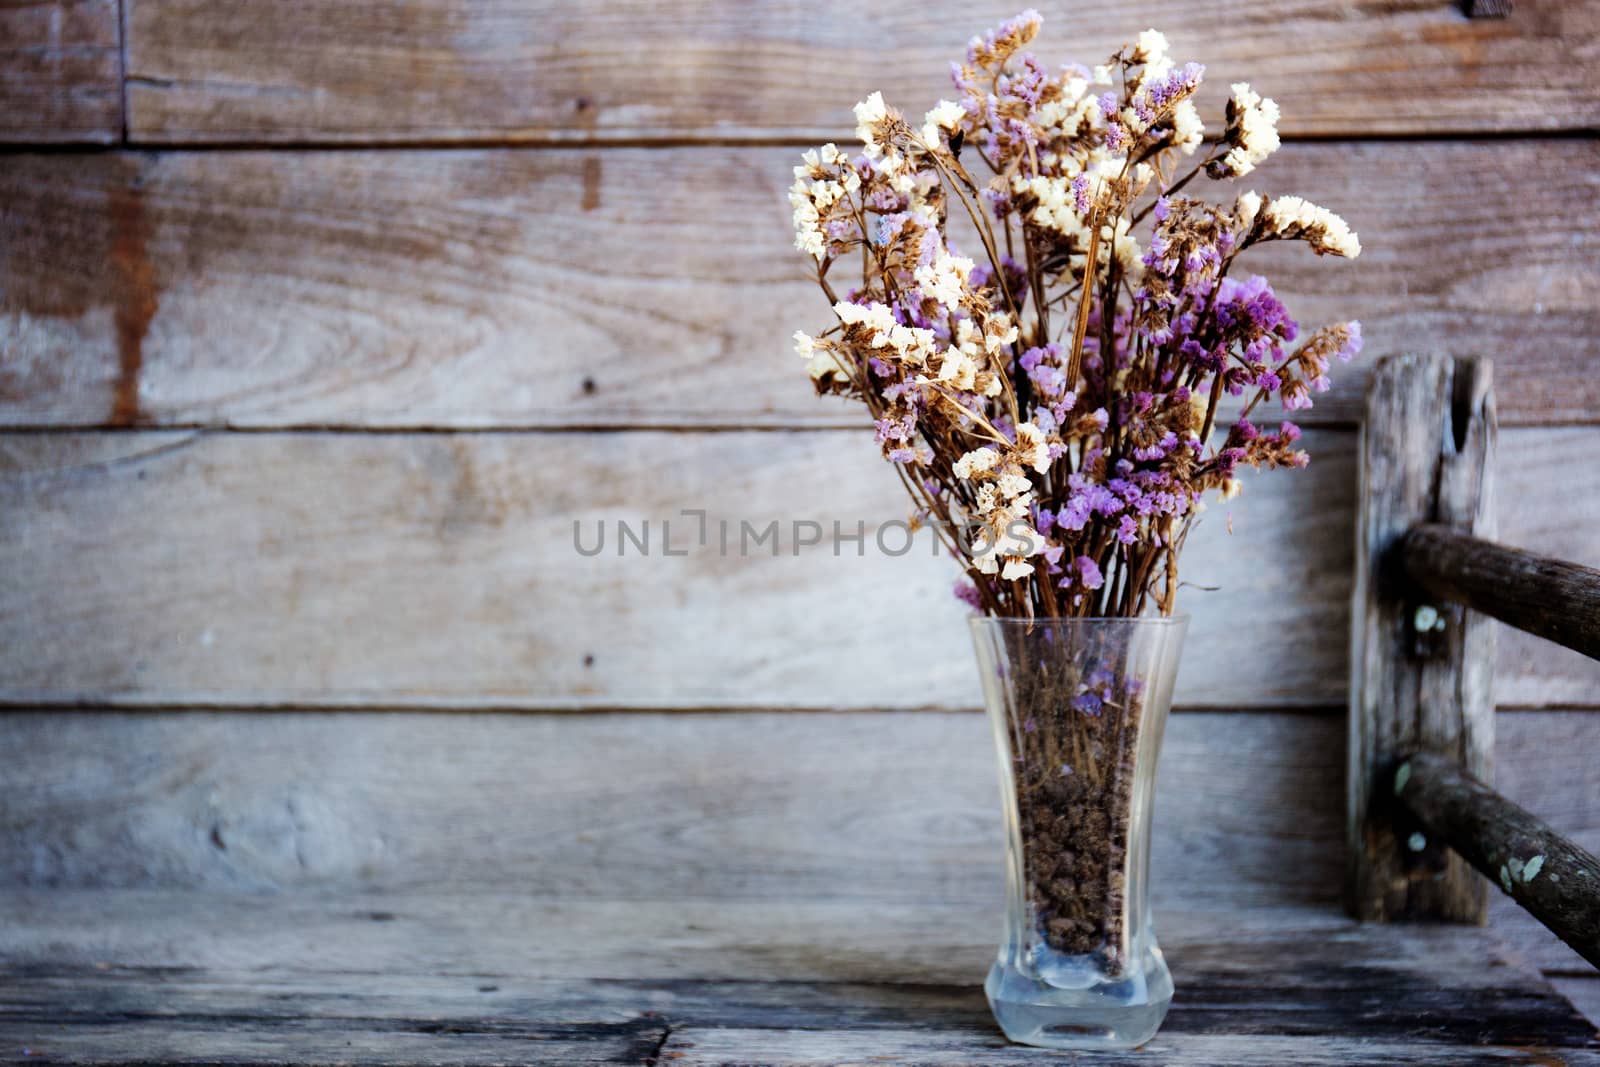 Glass of vase and dry flower on wooden table.